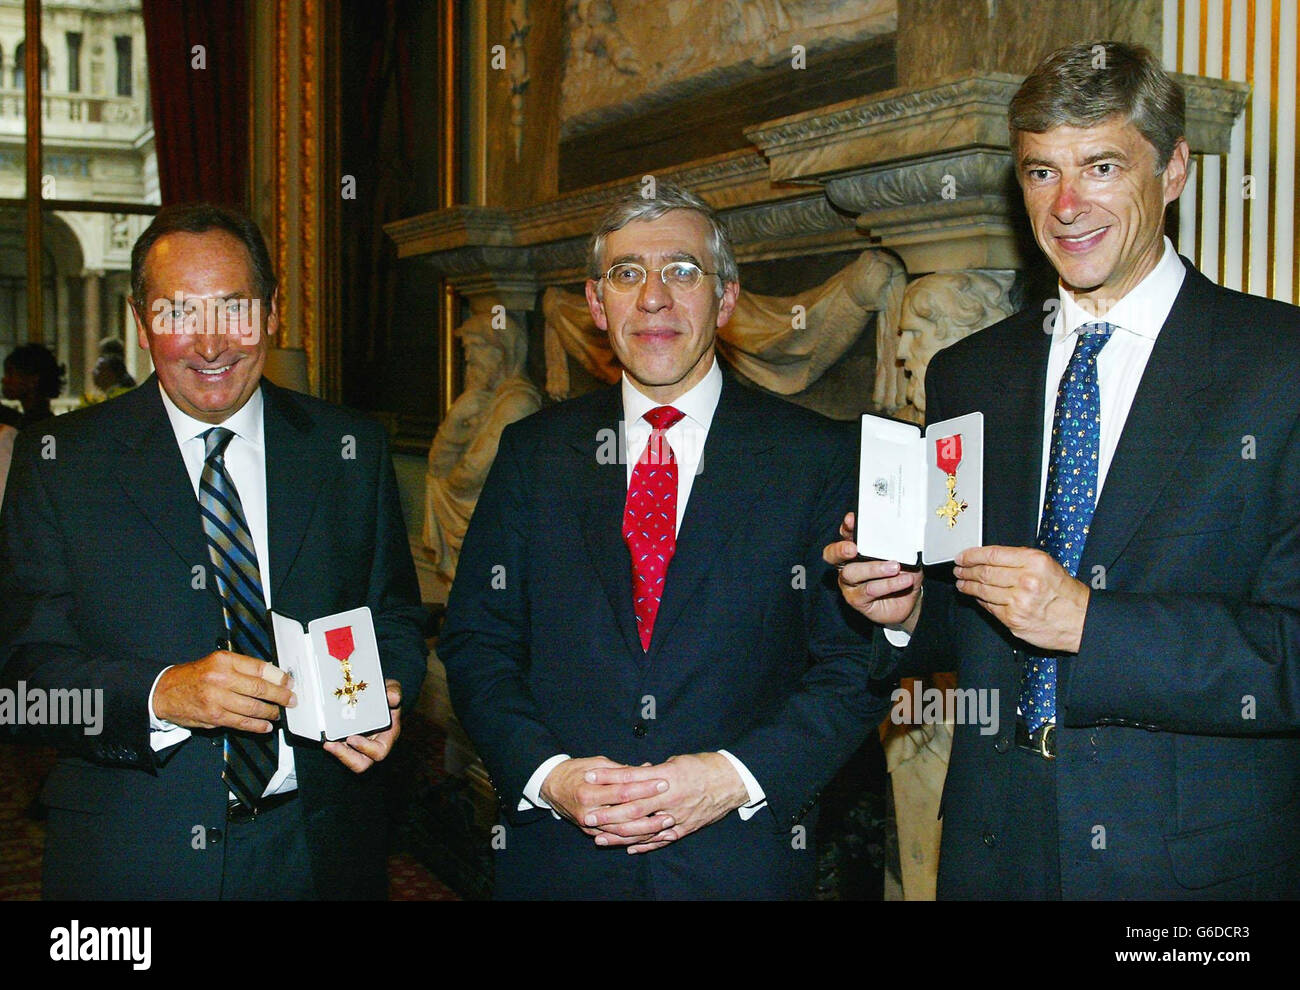 Premiership football coaches, Liverpool's Gerard Houllier (left) and Arsenal's Arsene Wenger, with their honorary OBE's presented to them by Foreign Secretary Jack Straw (centre) at the Foreign and Commonwealth Office in London. Stock Photo